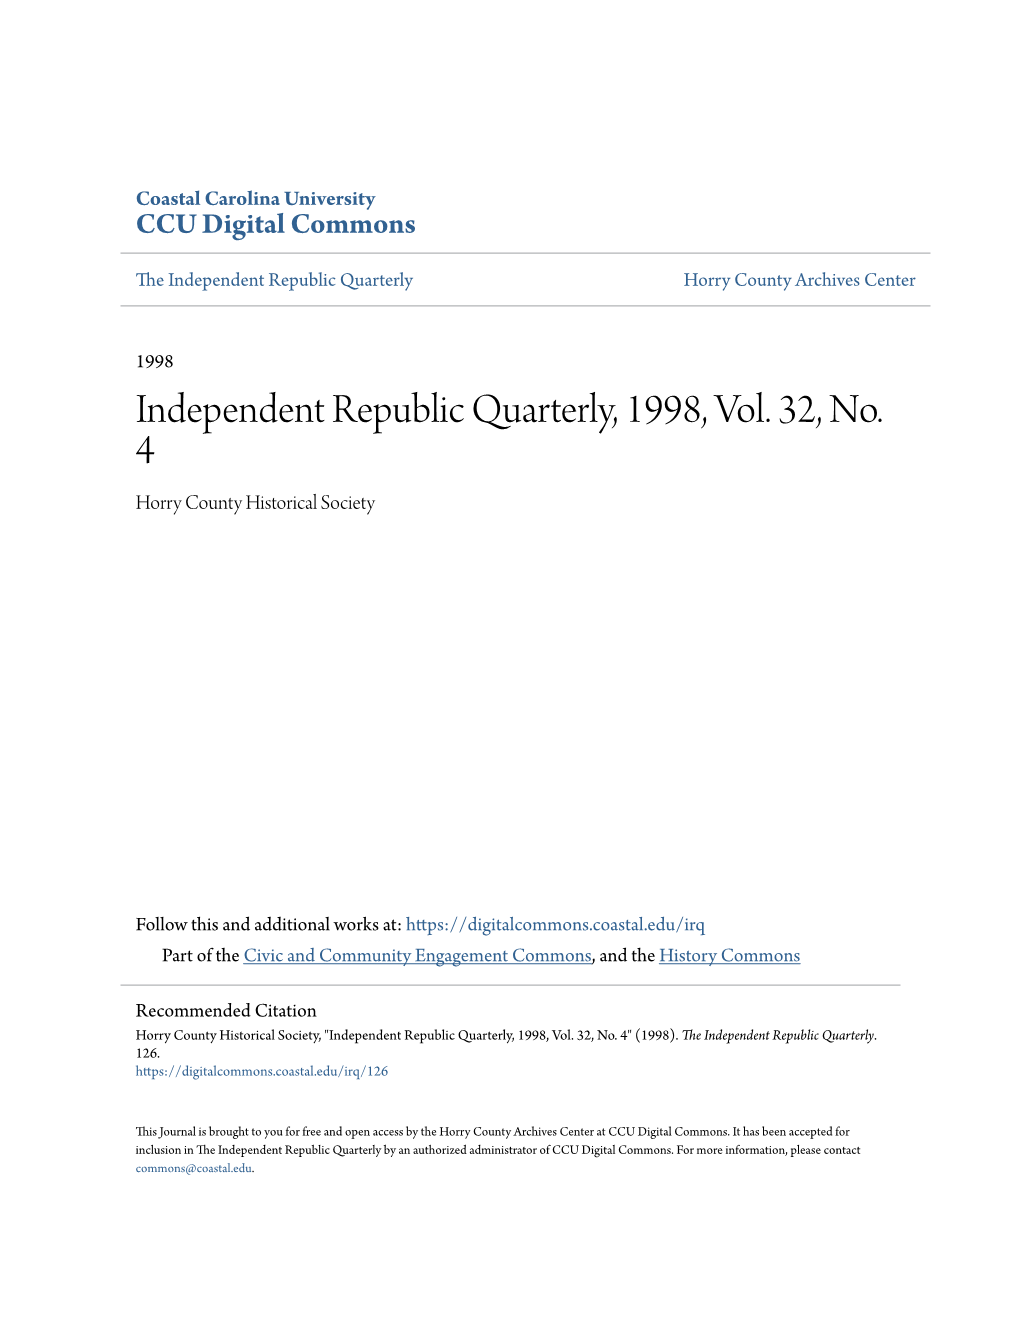 Independent Republic Quarterly, 1998, Vol. 32, No. 4 Horry County Historical Society